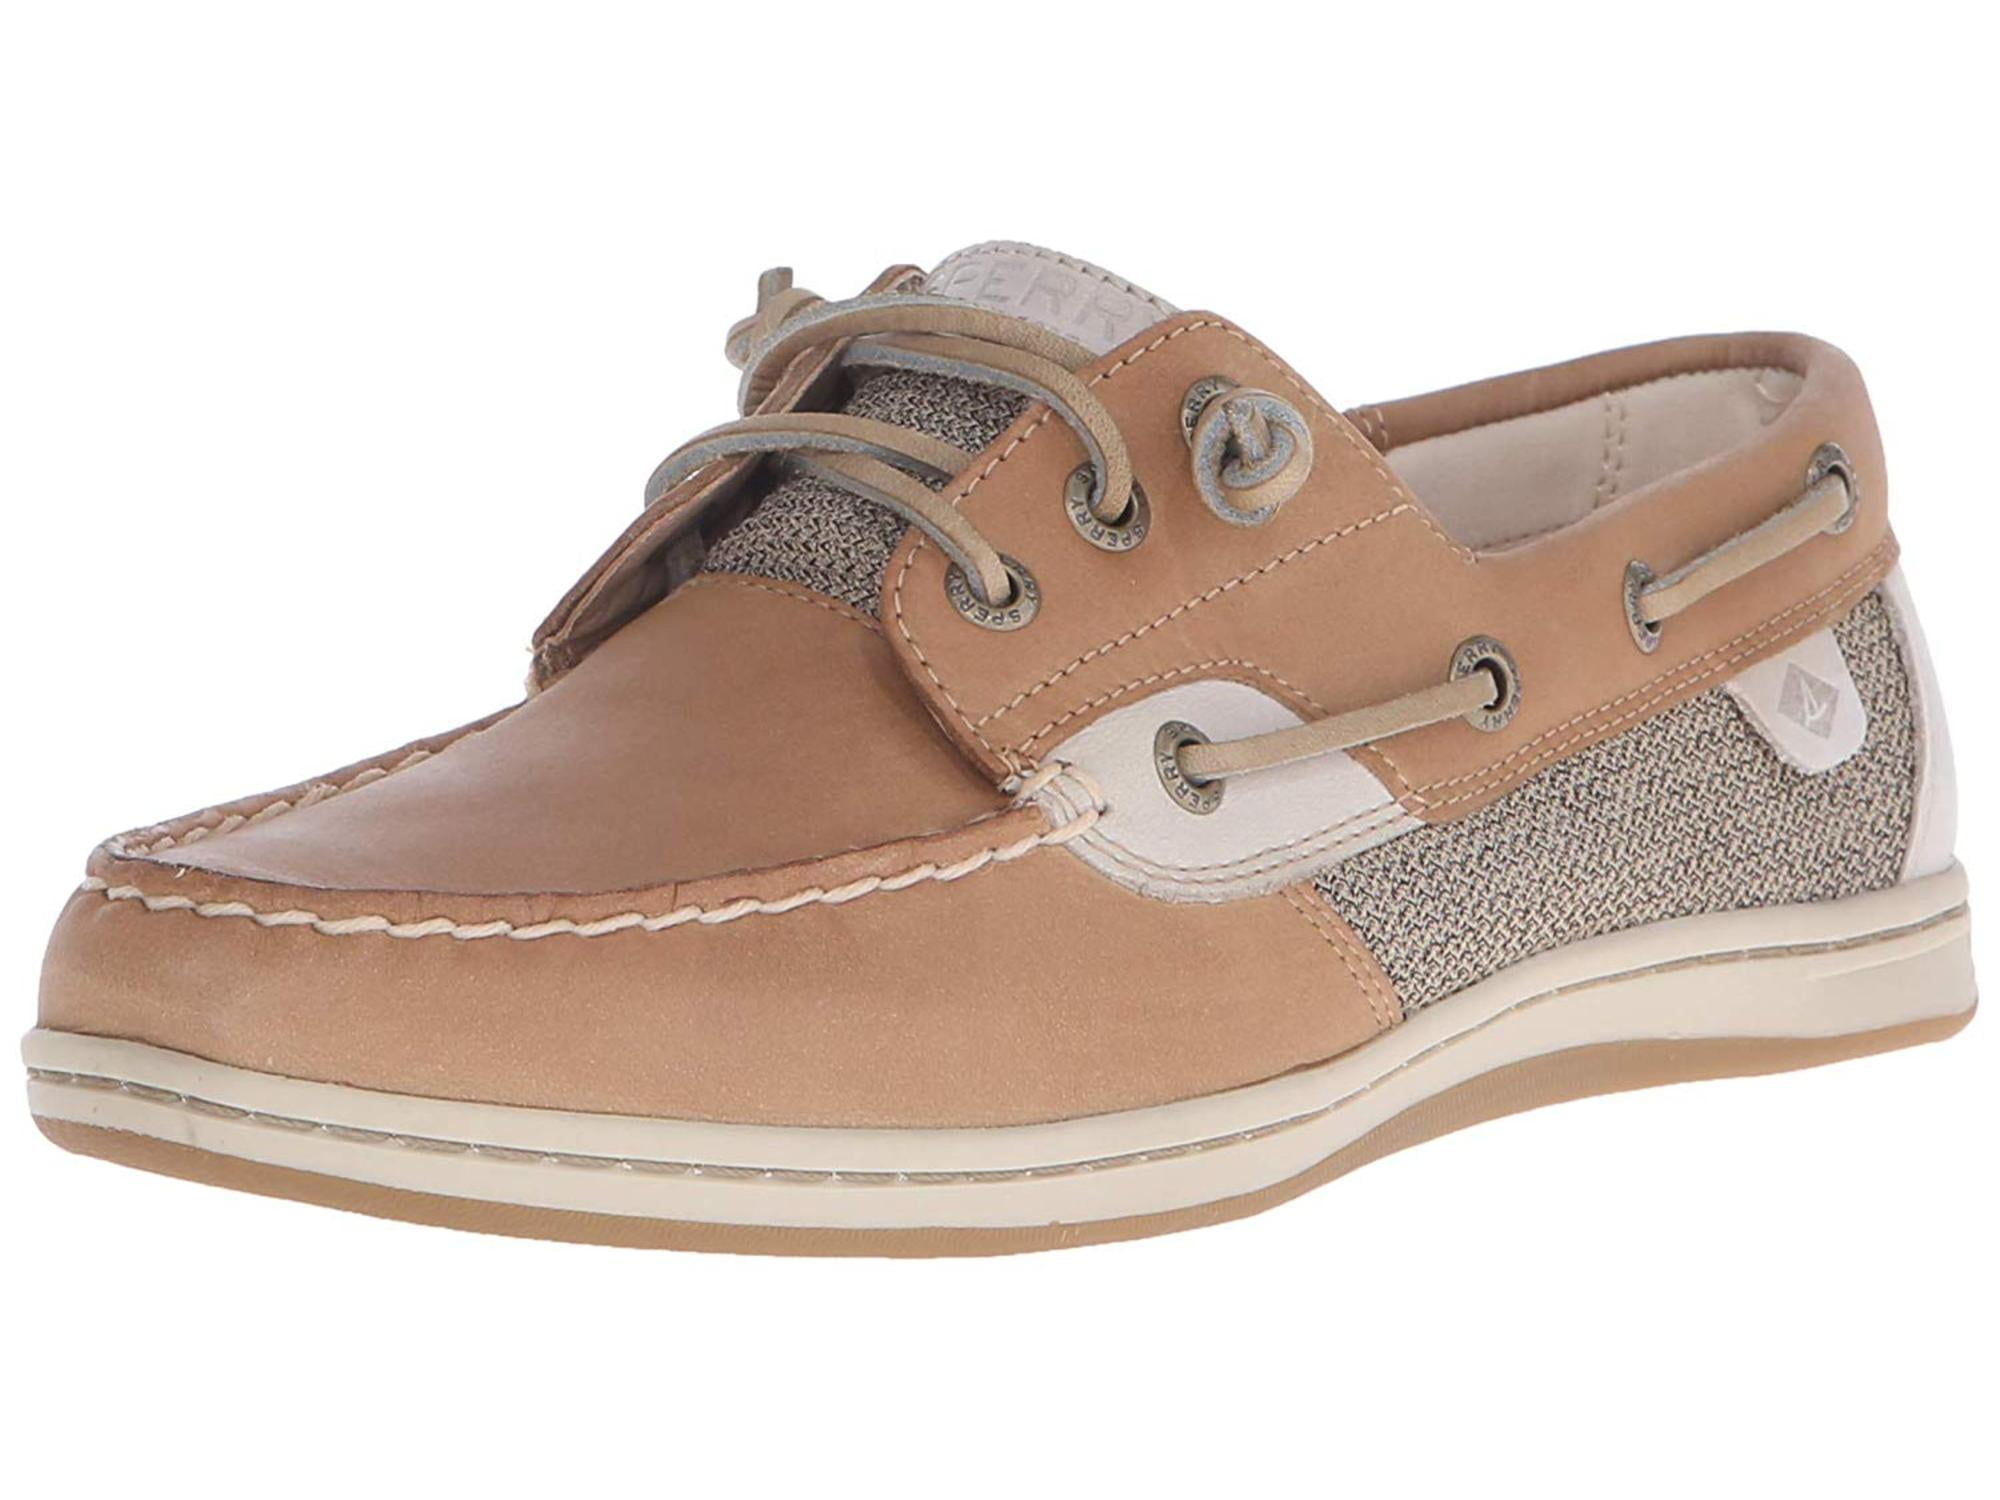 Sperry Top-Sider Women's Songfish Boat 